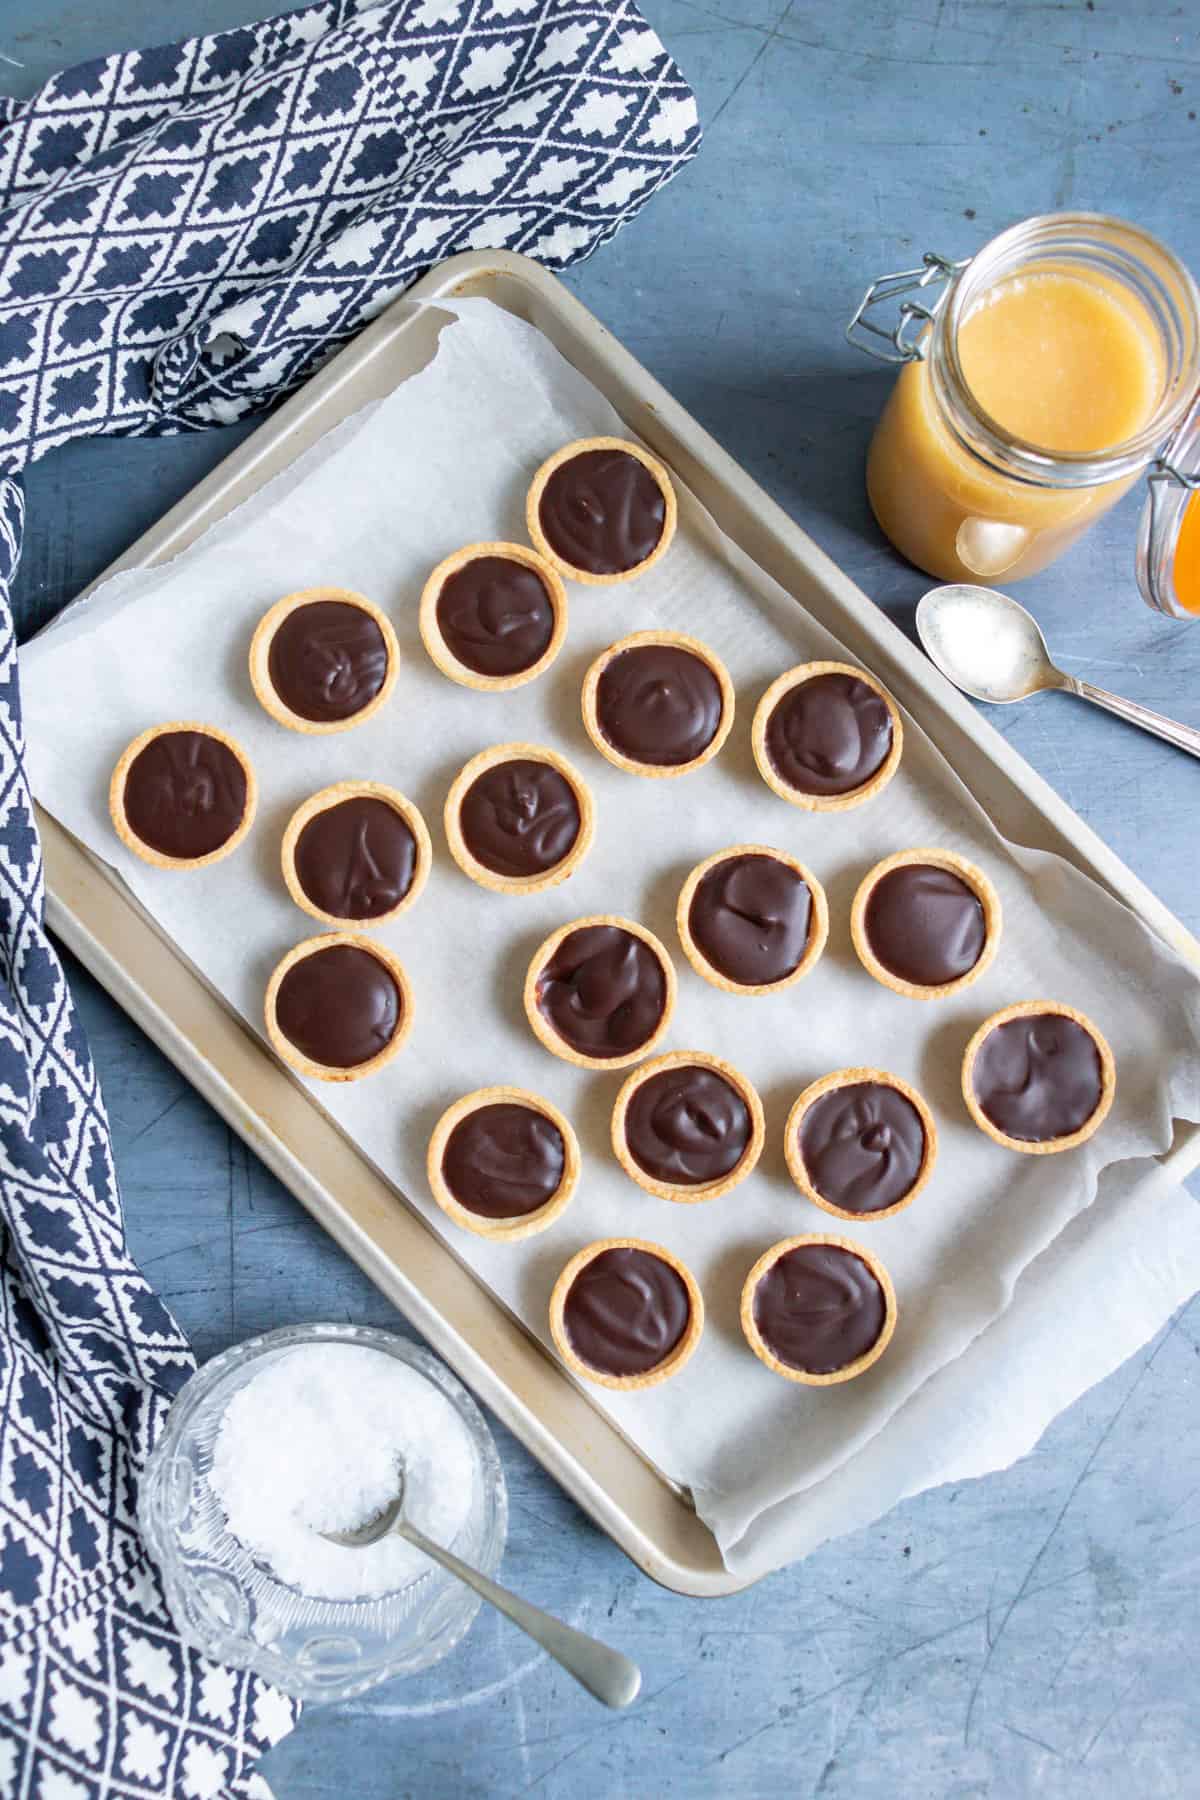 Chocolate ganache spooned into pastry shells and chilled.